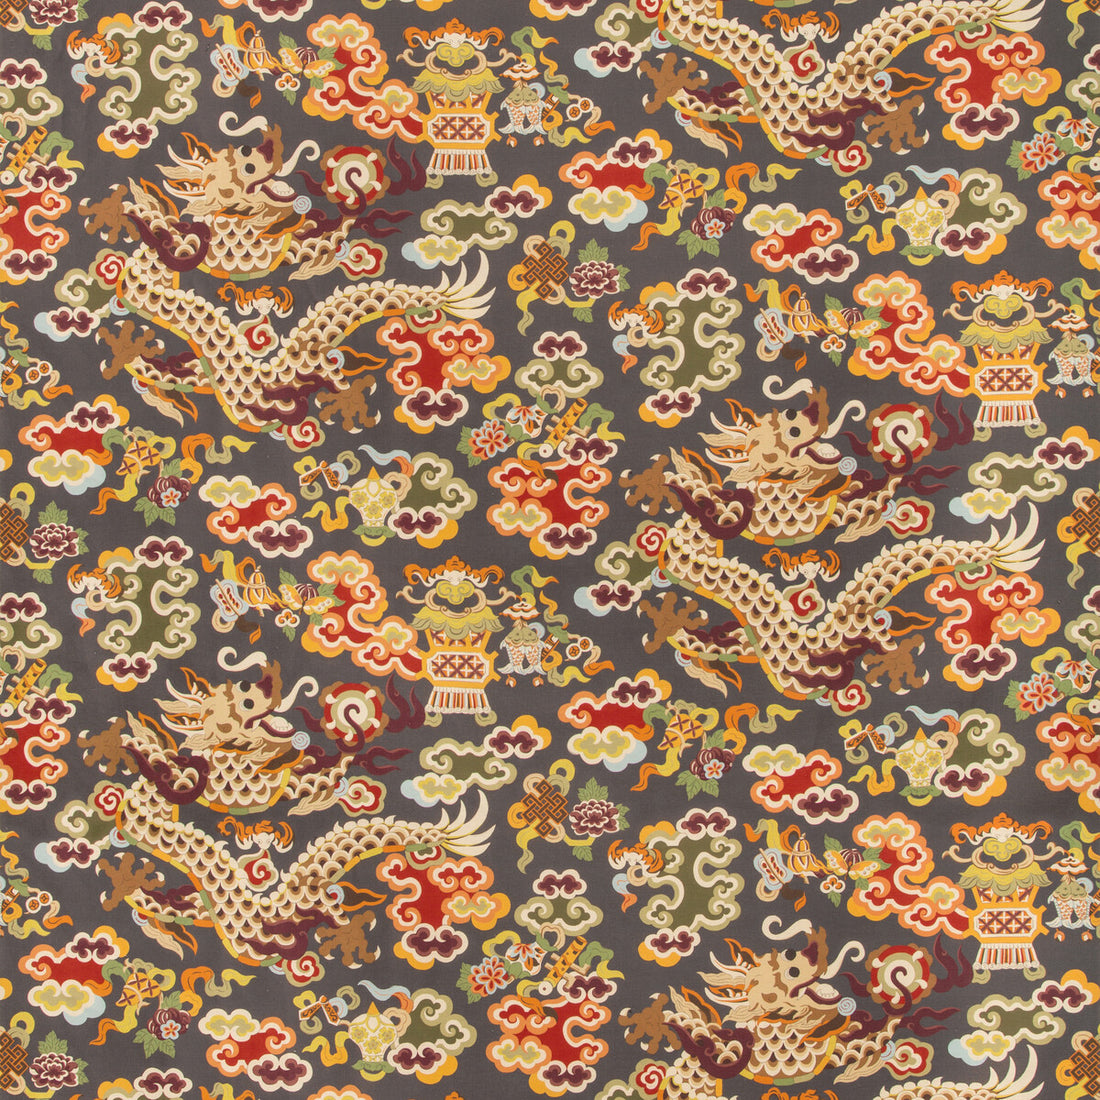 Ming Dragon Print fabric in grey color - pattern 8019140.219.0 - by Brunschwig &amp; Fils in the Summer Palace collection